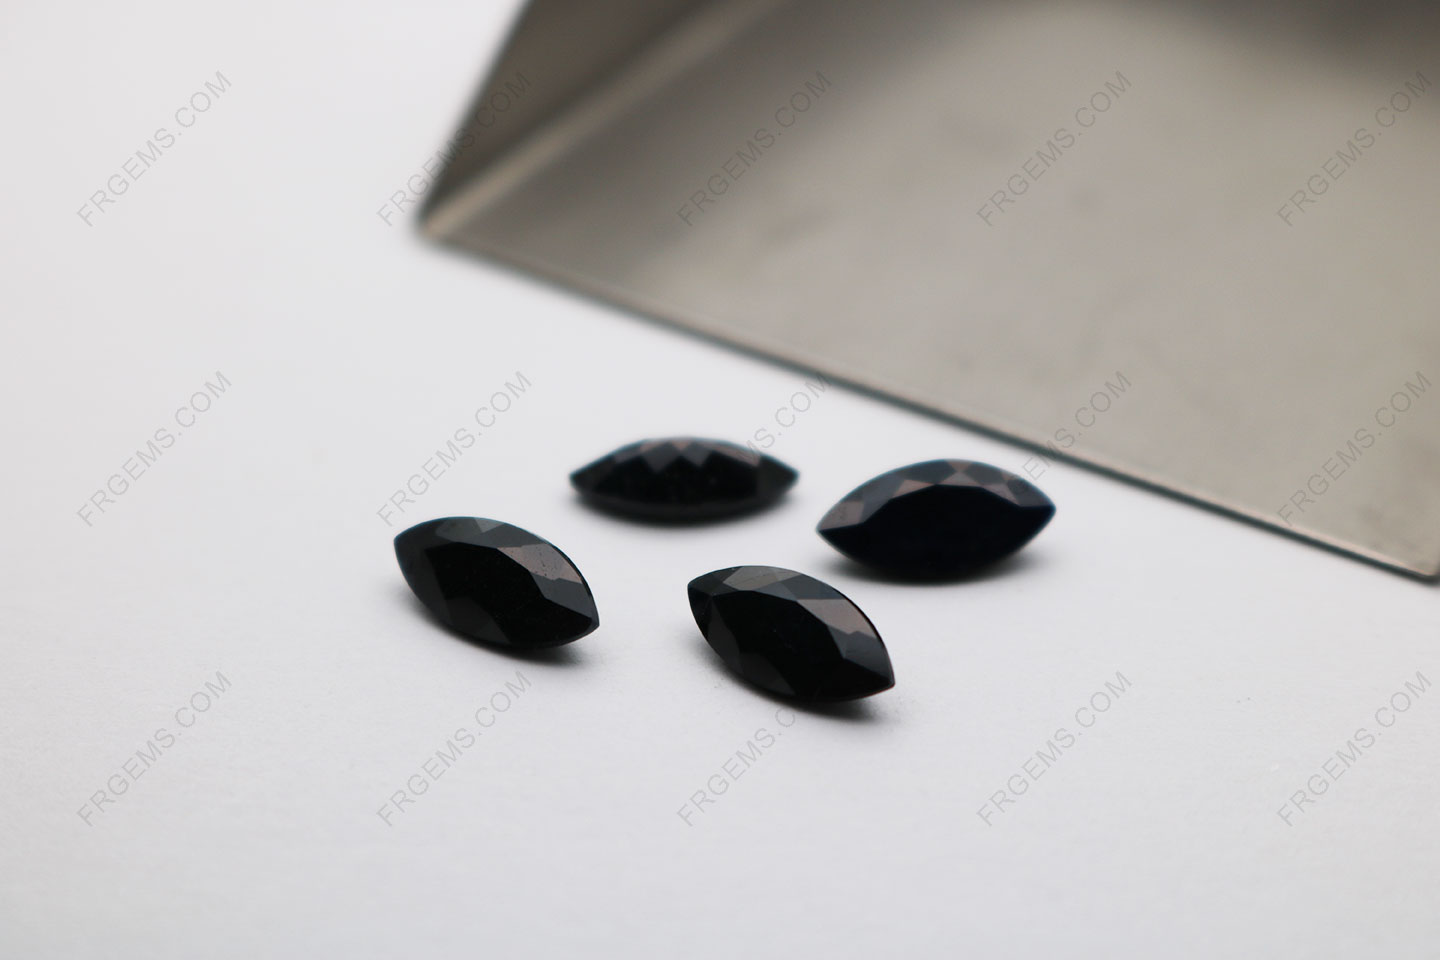 Natural genuine Black sapphire marquise faceted 11.5x5.5mm gemstones wholesale from China Supplier